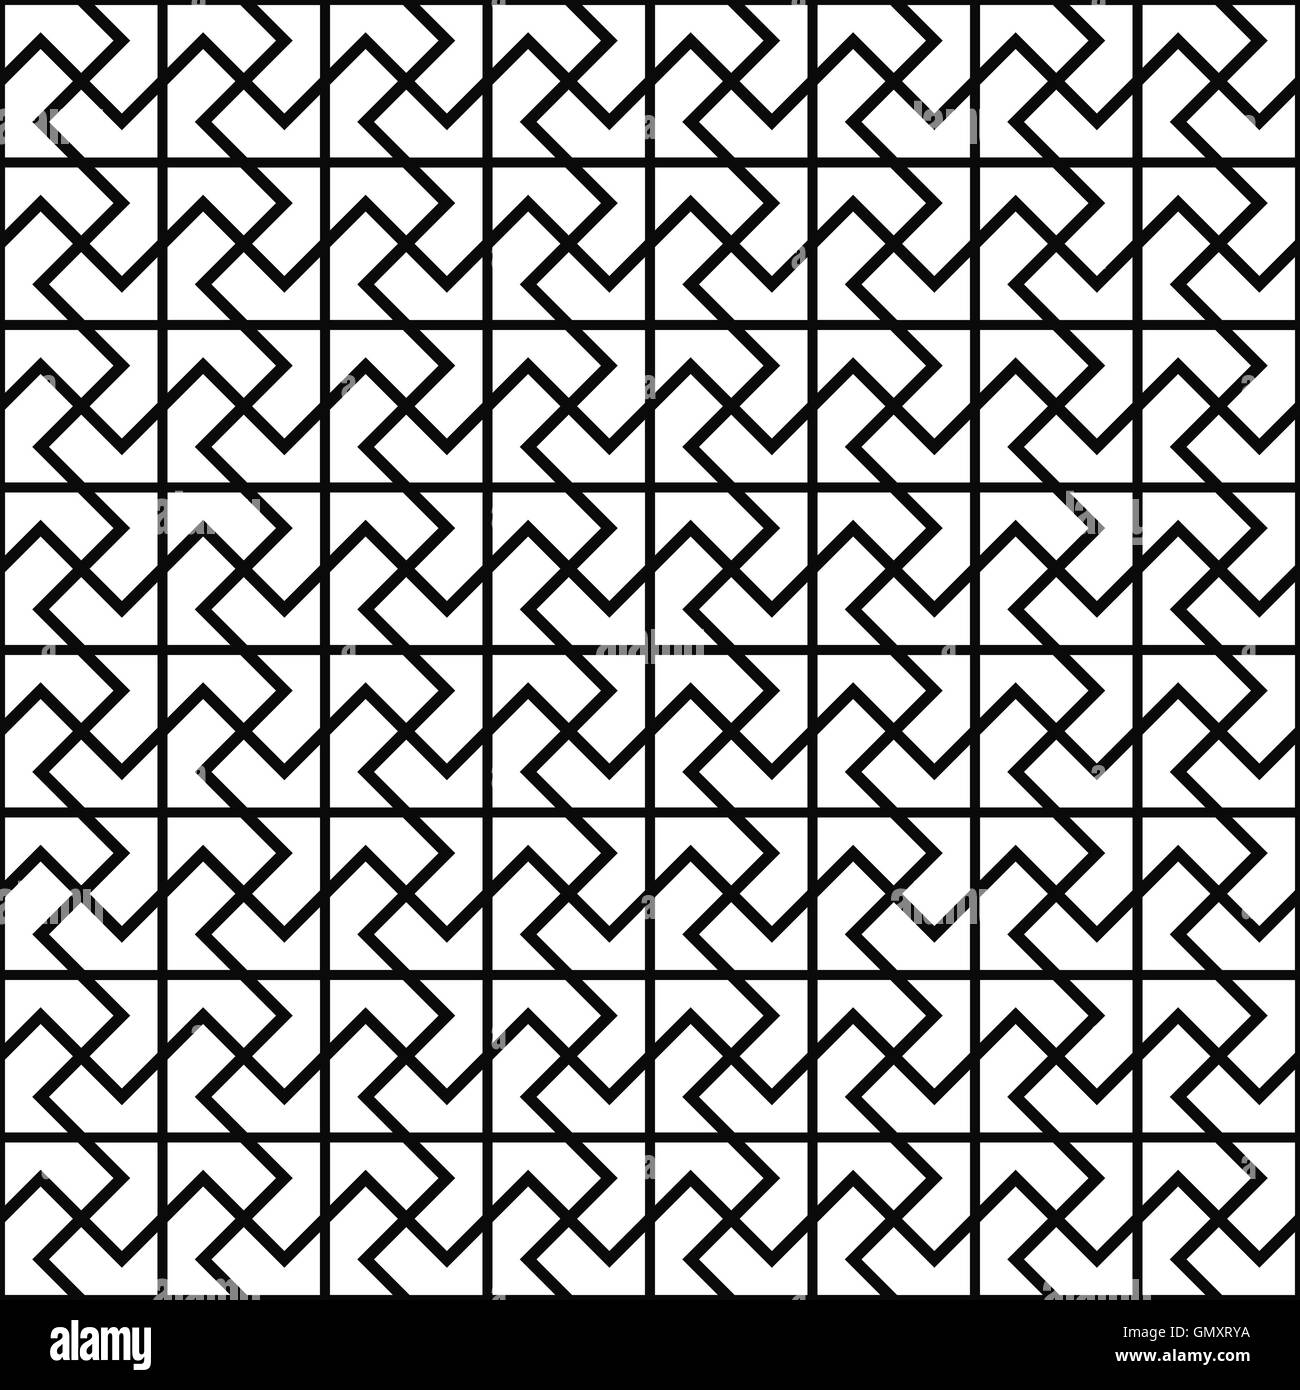 Repeating black and white floor pattern Stock Vector